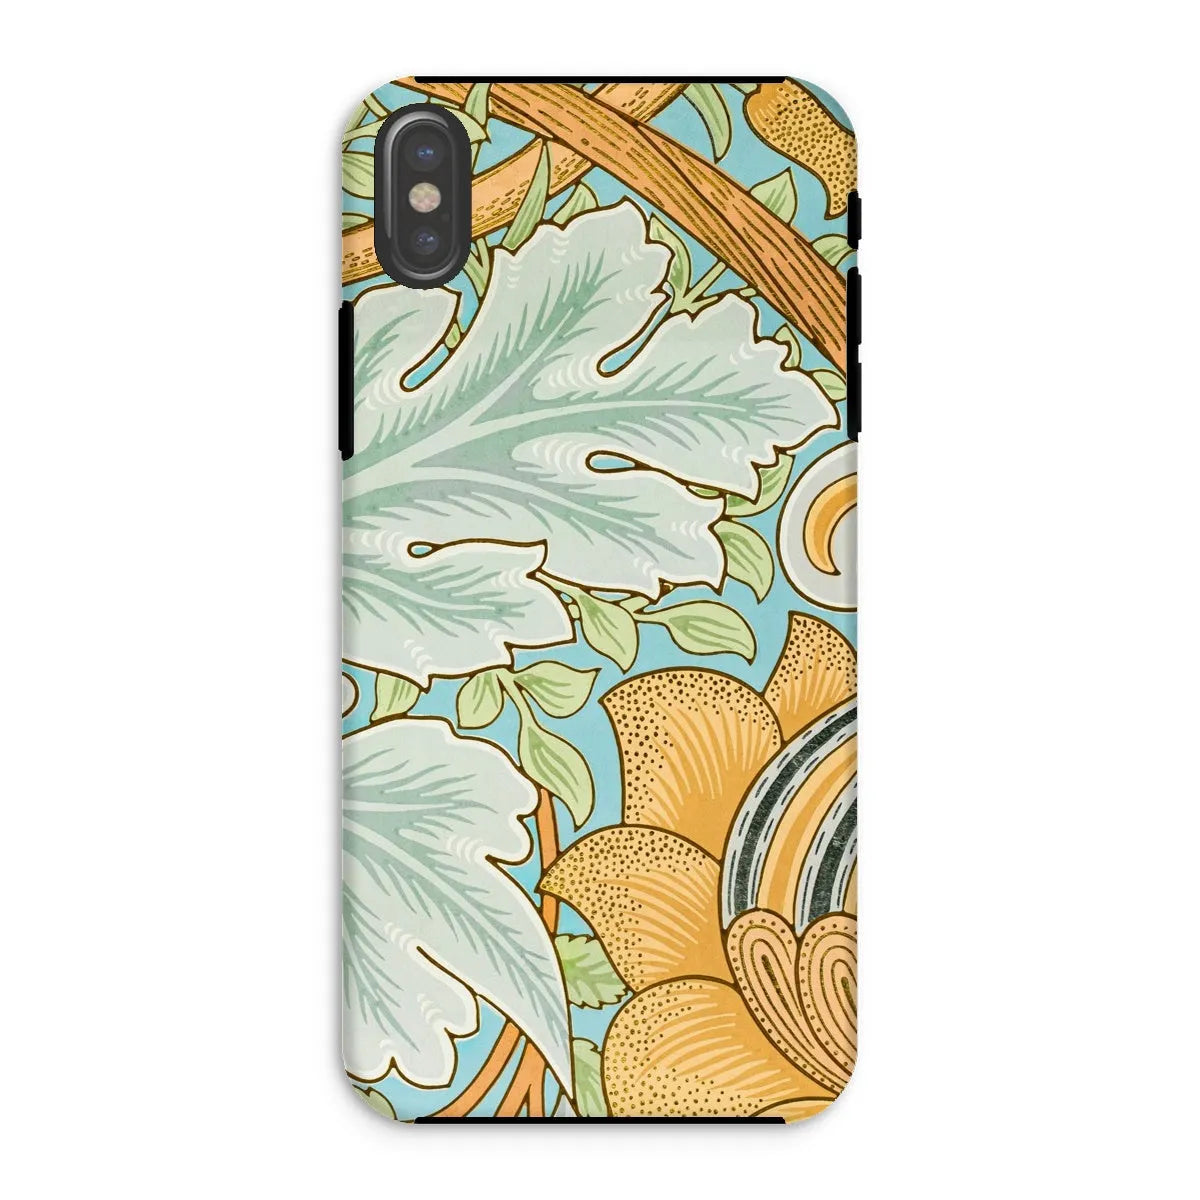 St. James - Arts And Crafts Phone Case - William Morris - Iphone Xs / Matte - Mobile Phone Cases - Aesthetic Art